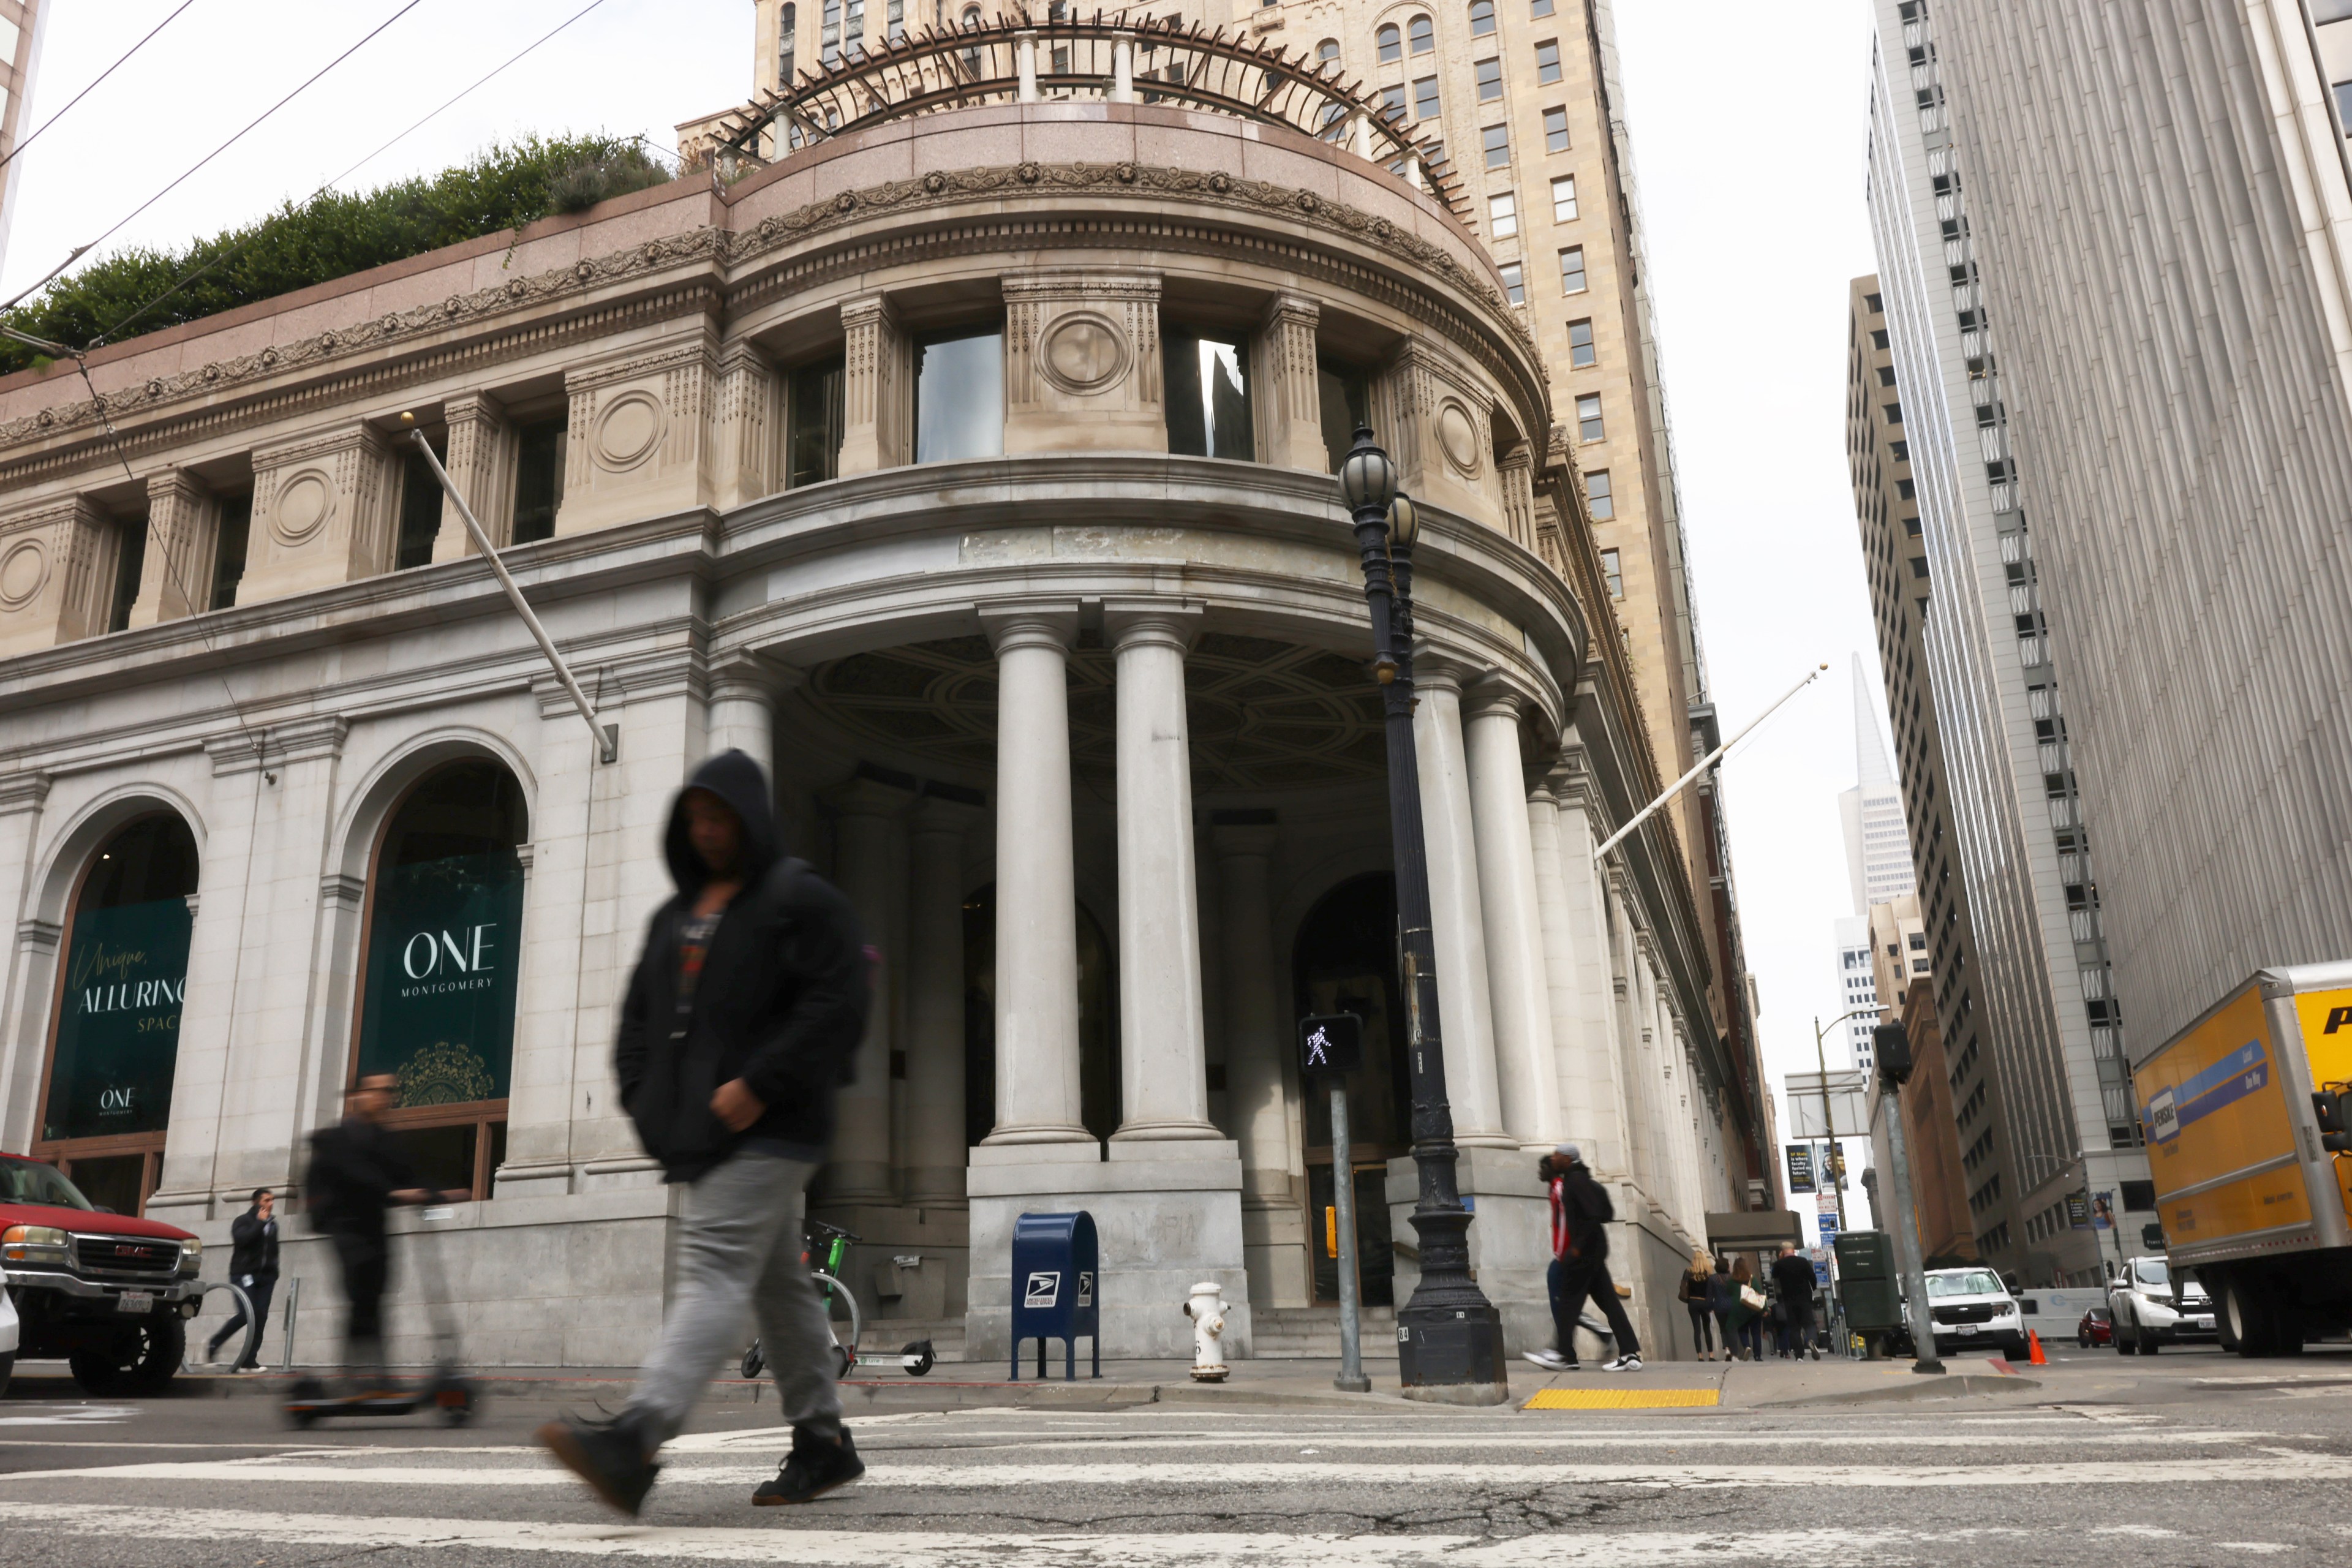 Downtown San Francisco’s Future? More Innovation and Fun, Fewer Offices